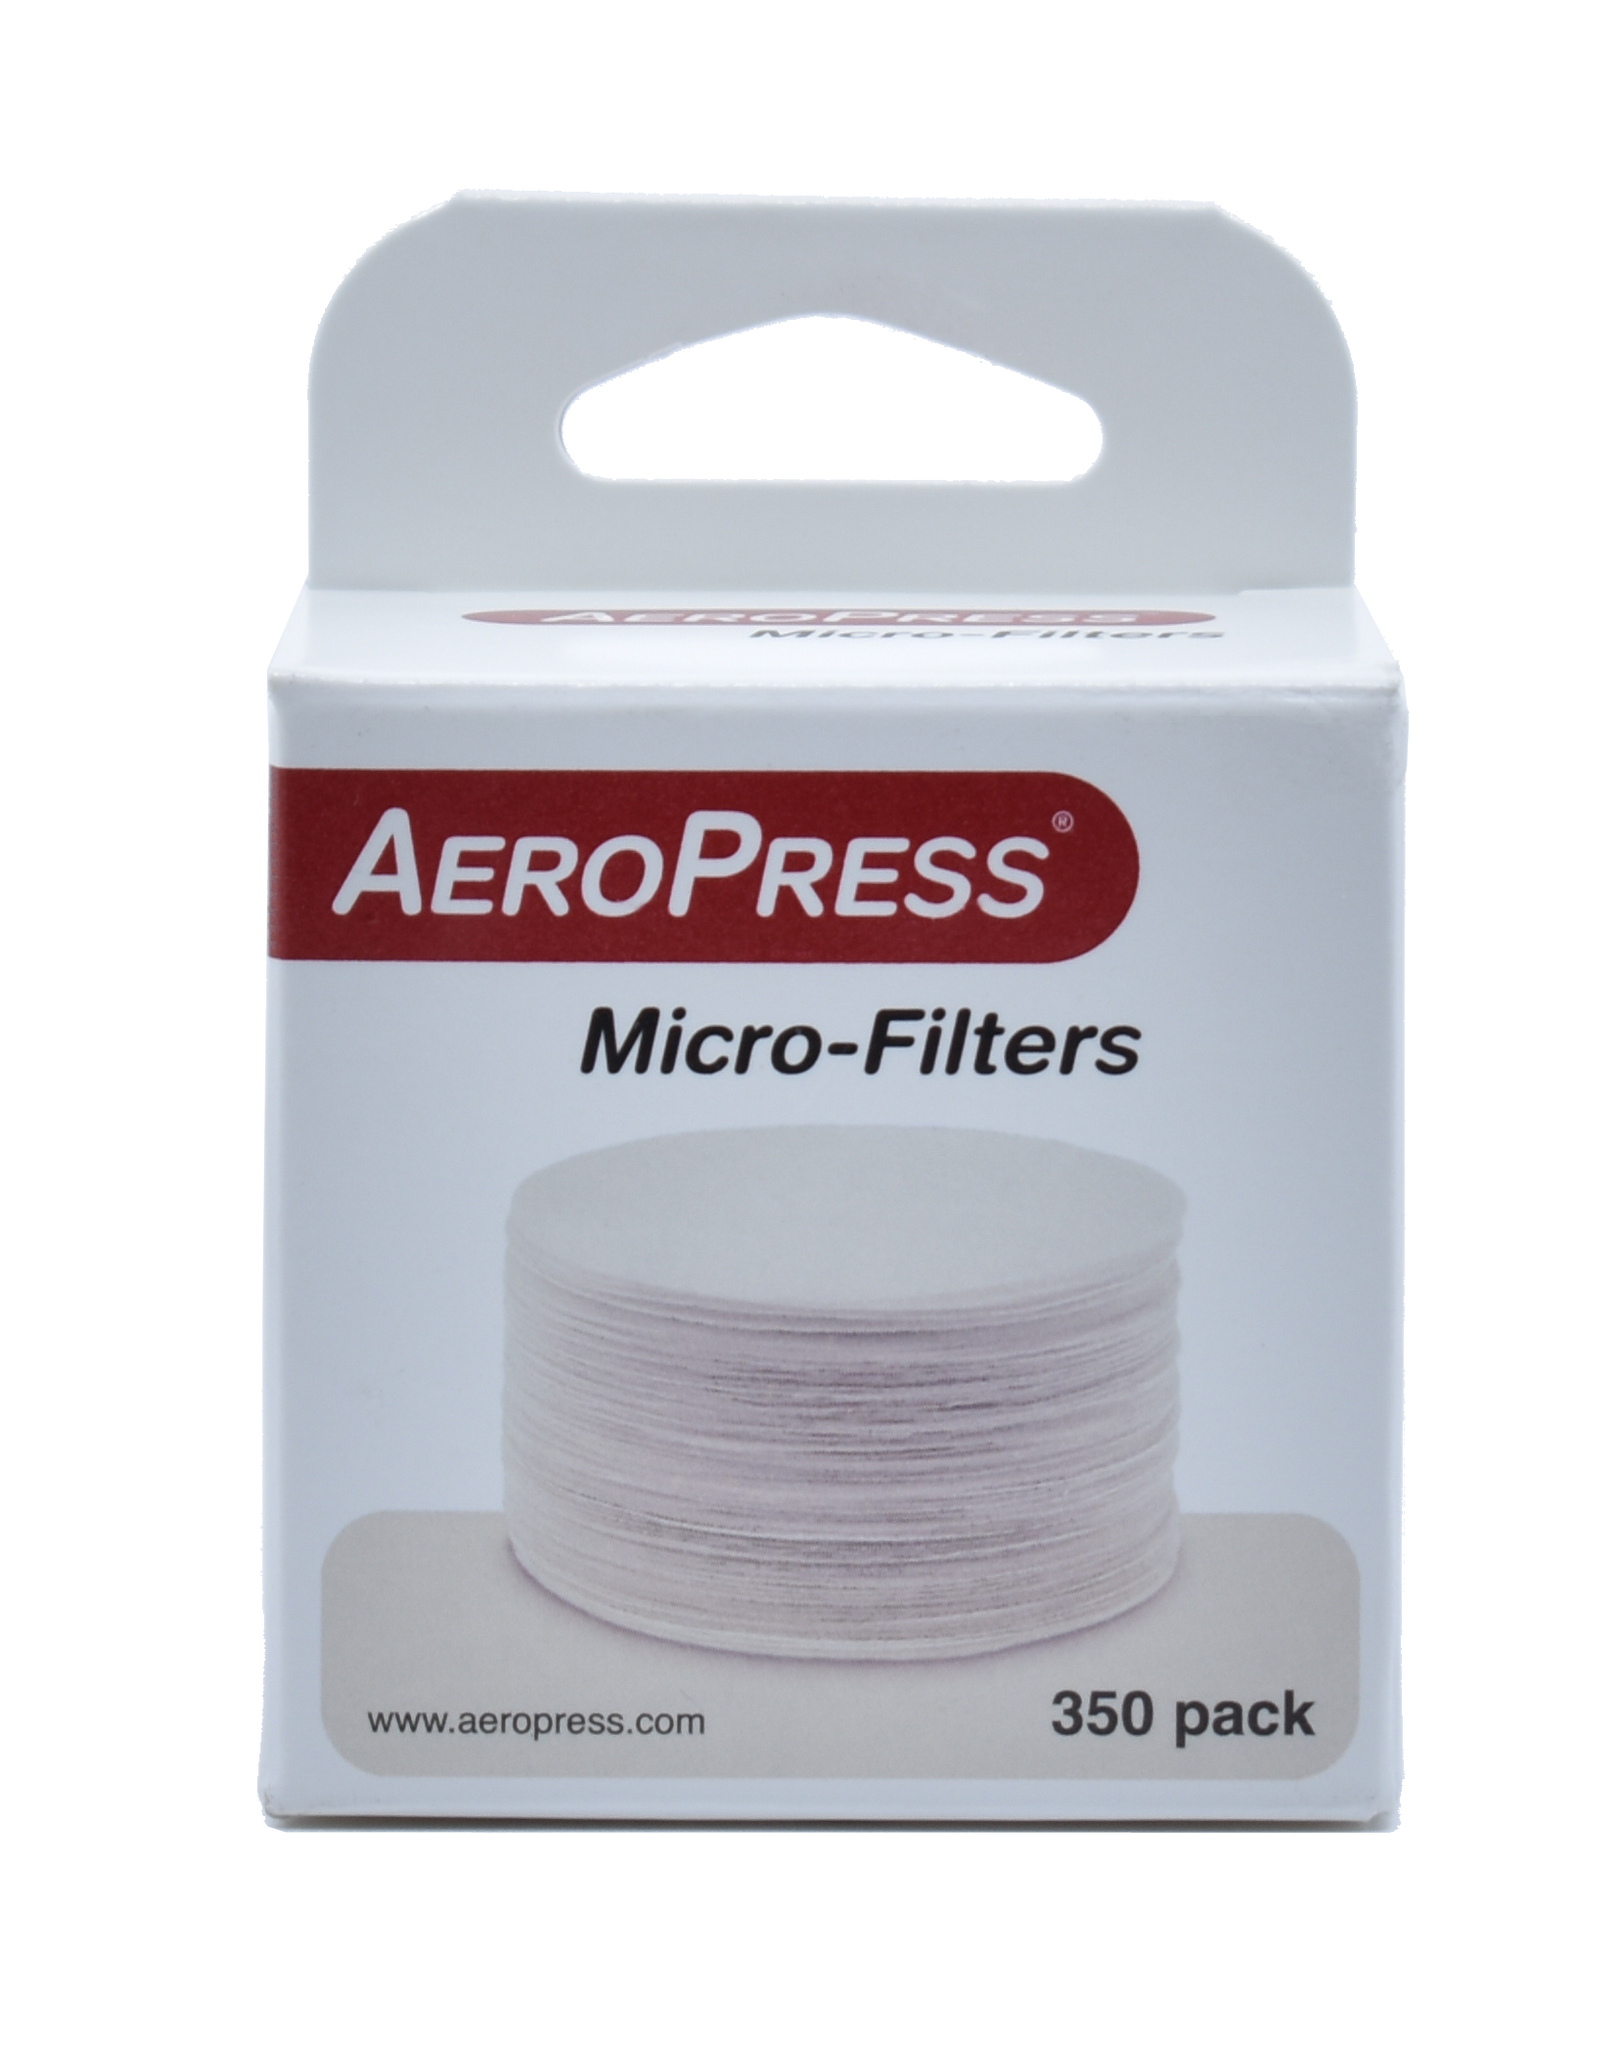 Aeropress Micro-filters Package Front View